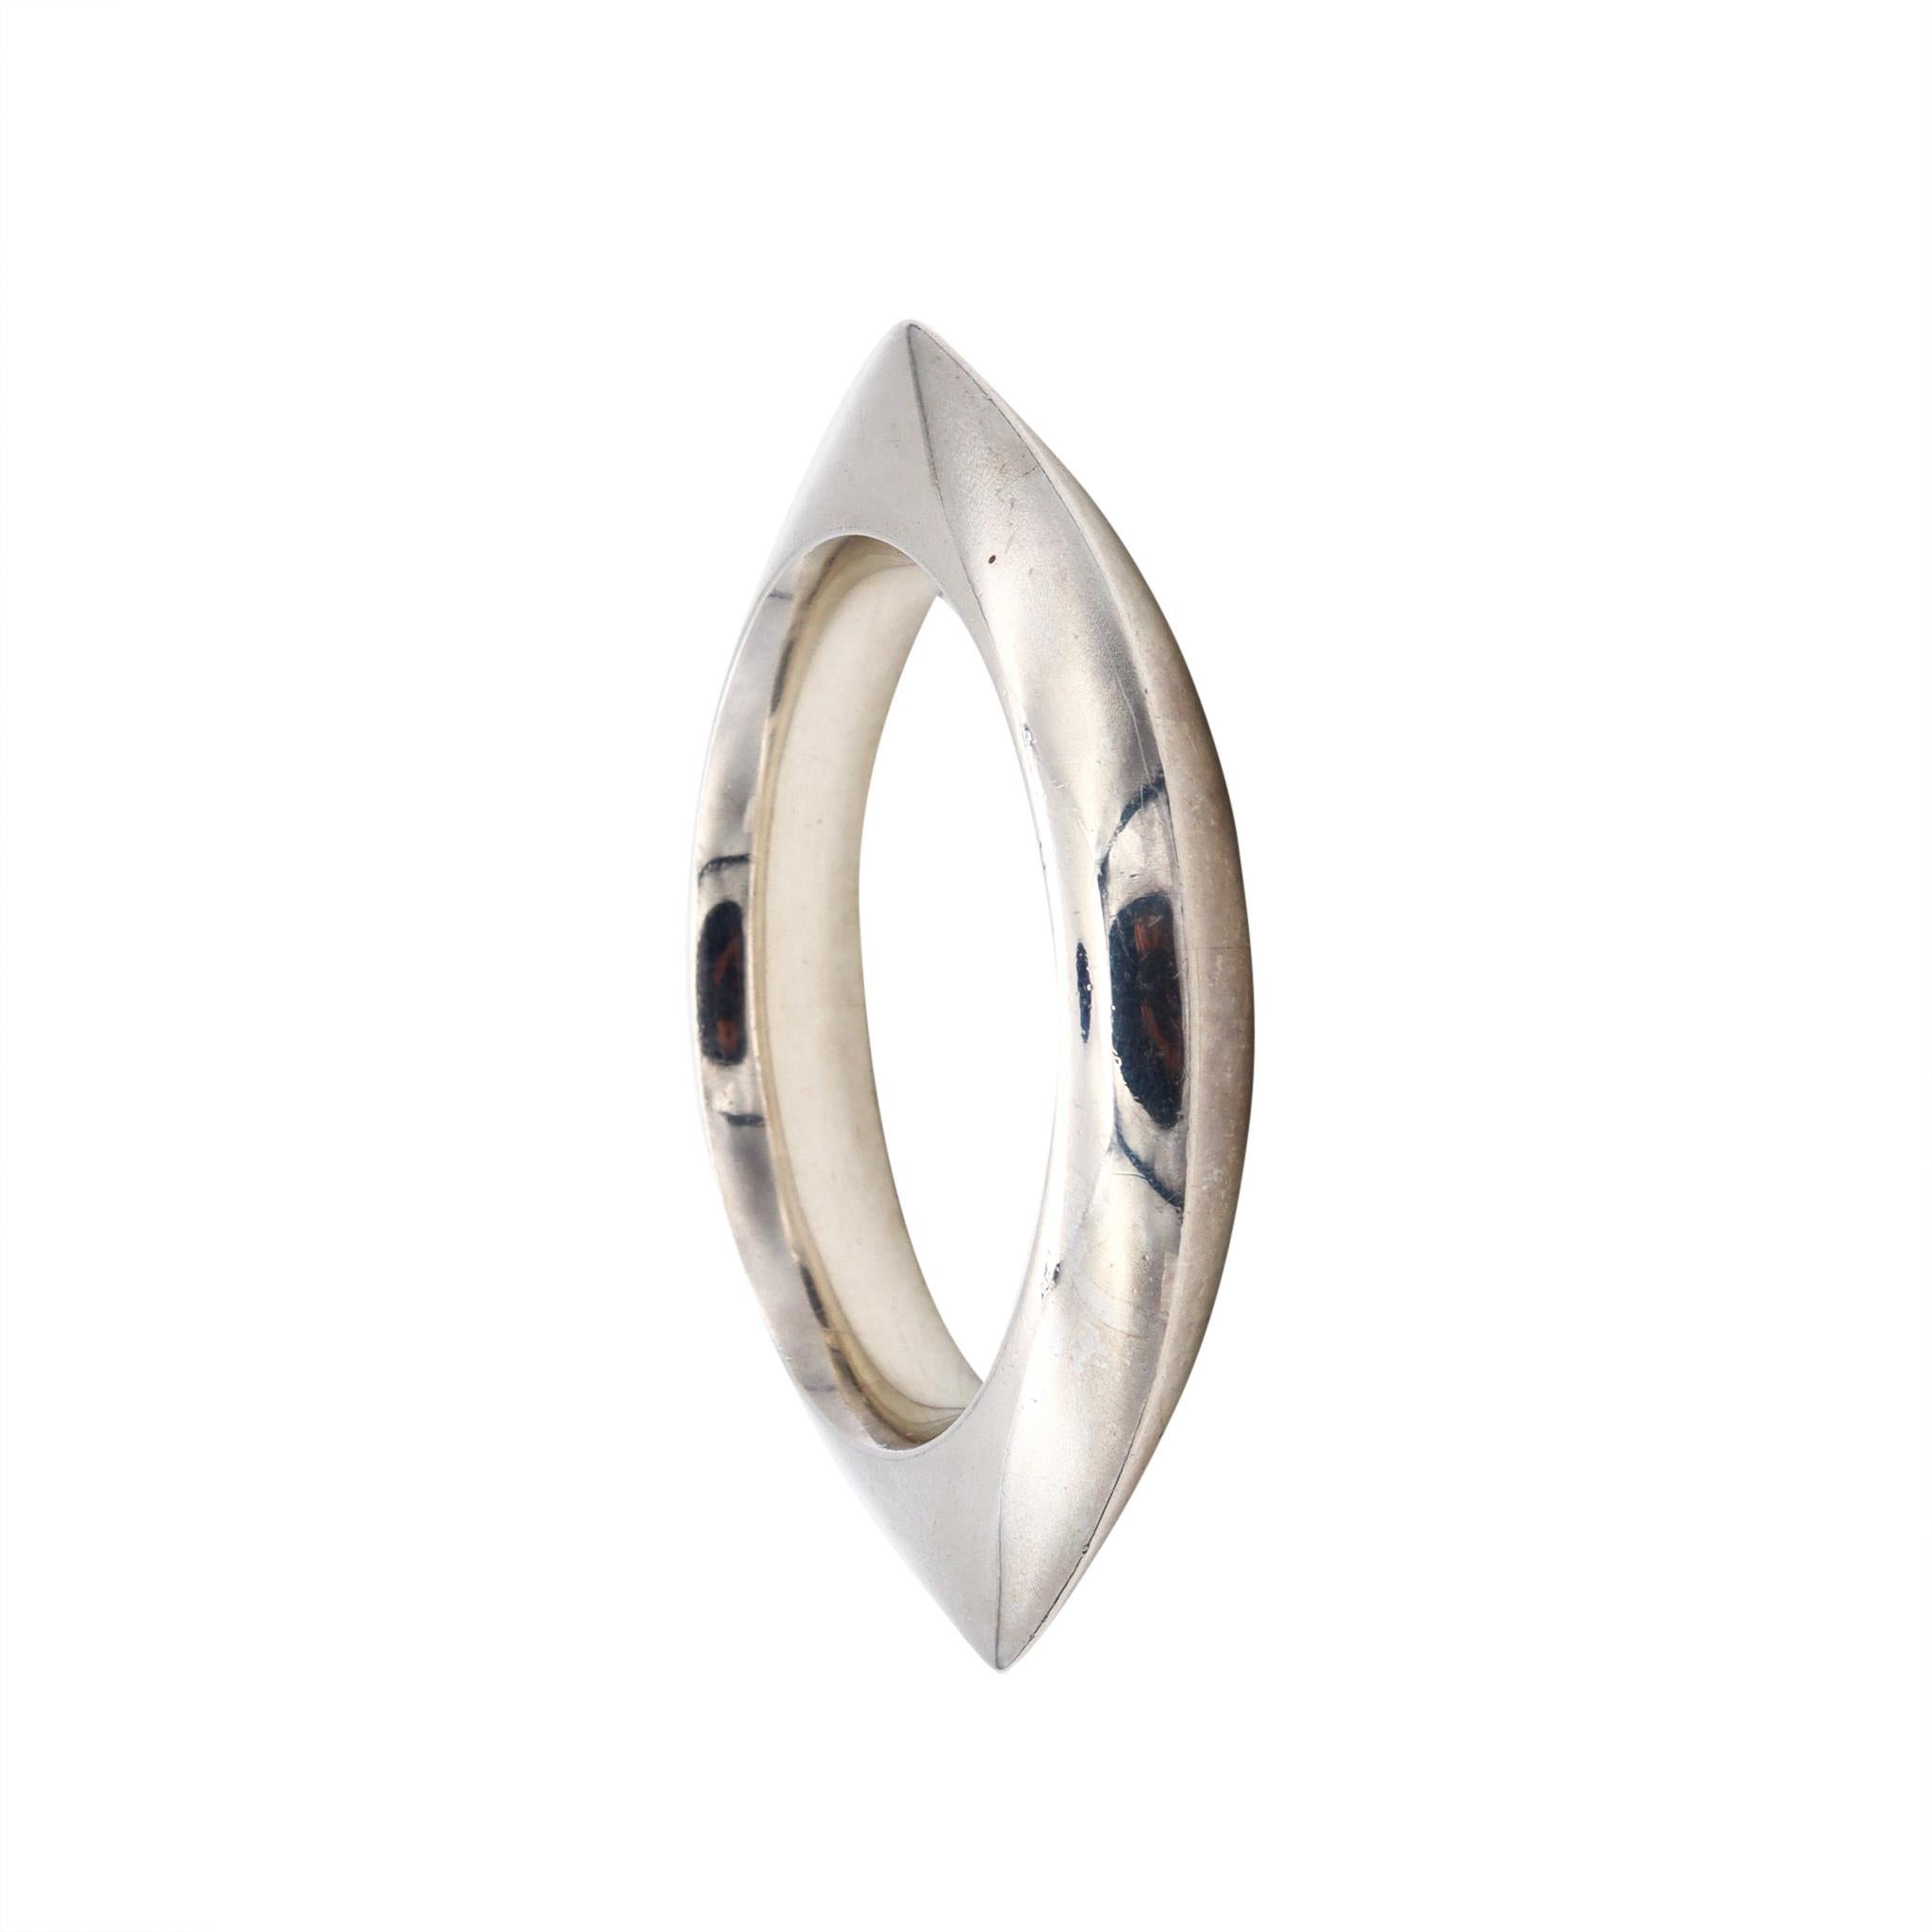 Geometric bangle designed by Nanna Ditzel (1923-2005) for Georg Jensen.

Stupendous vintage bangle bracelet, created in Copenhagen Denmark by Nanna Ditzel, back in the 1956. This is the Mobius model-111 designed with aero-dynamic geometric shape and